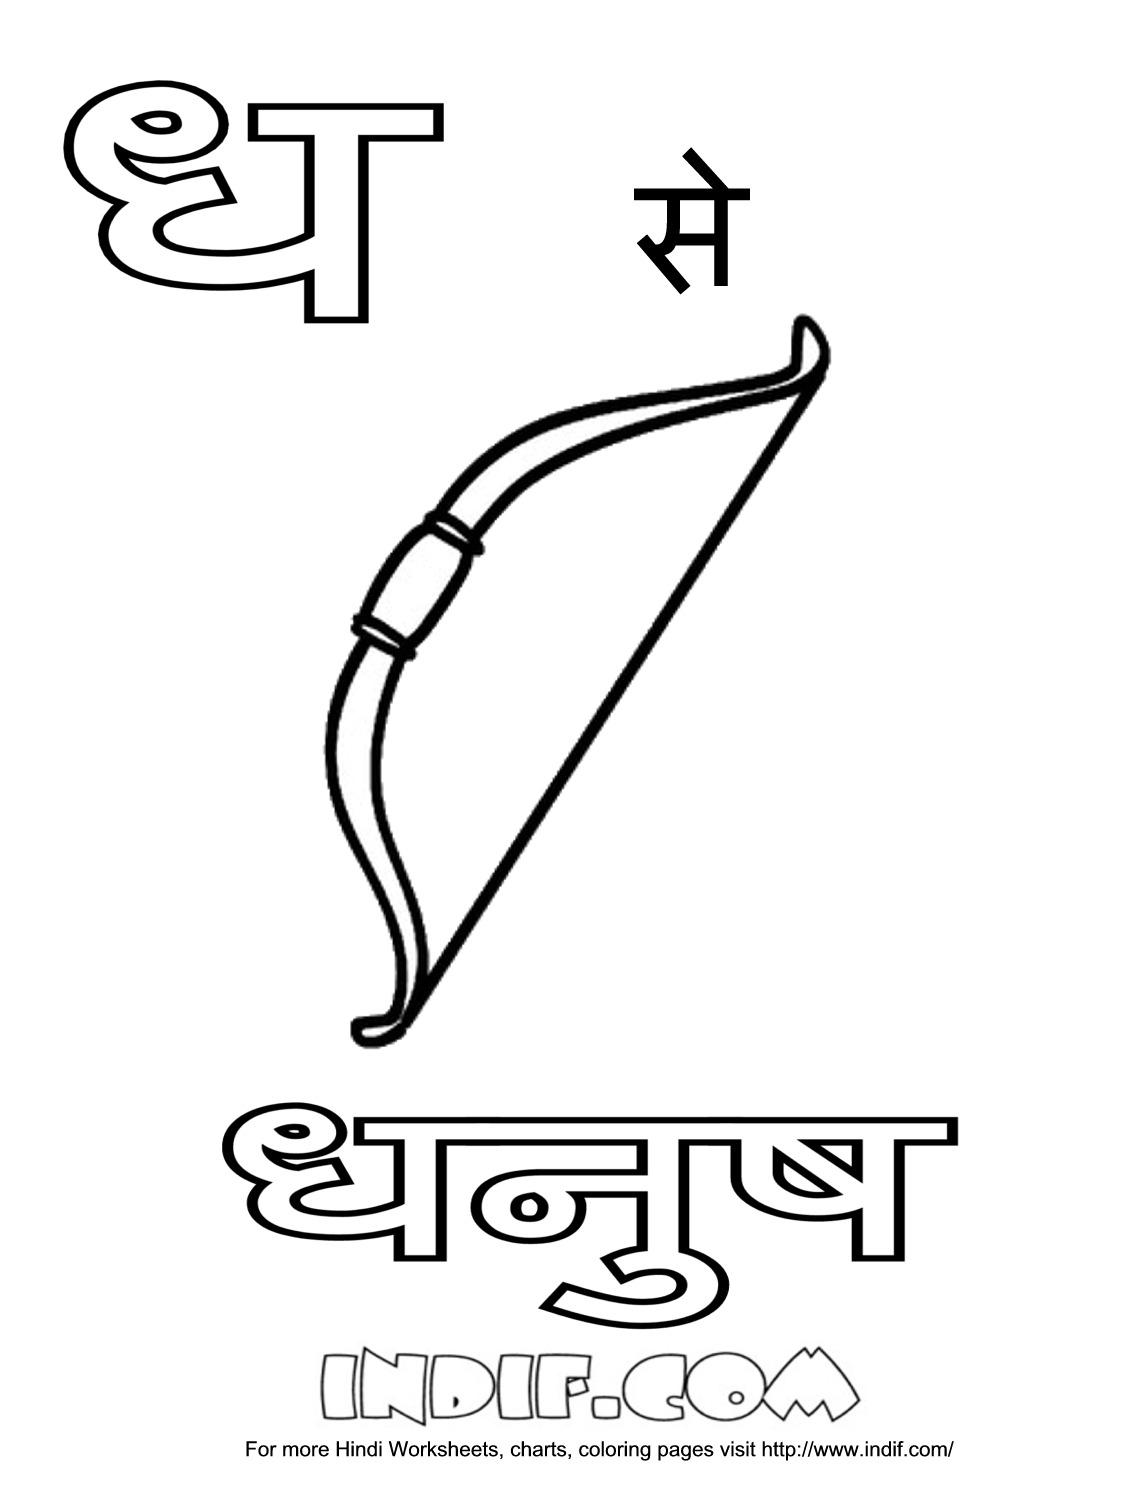 Hindi Alphabet Coloring Pages | Coloring Page Blog